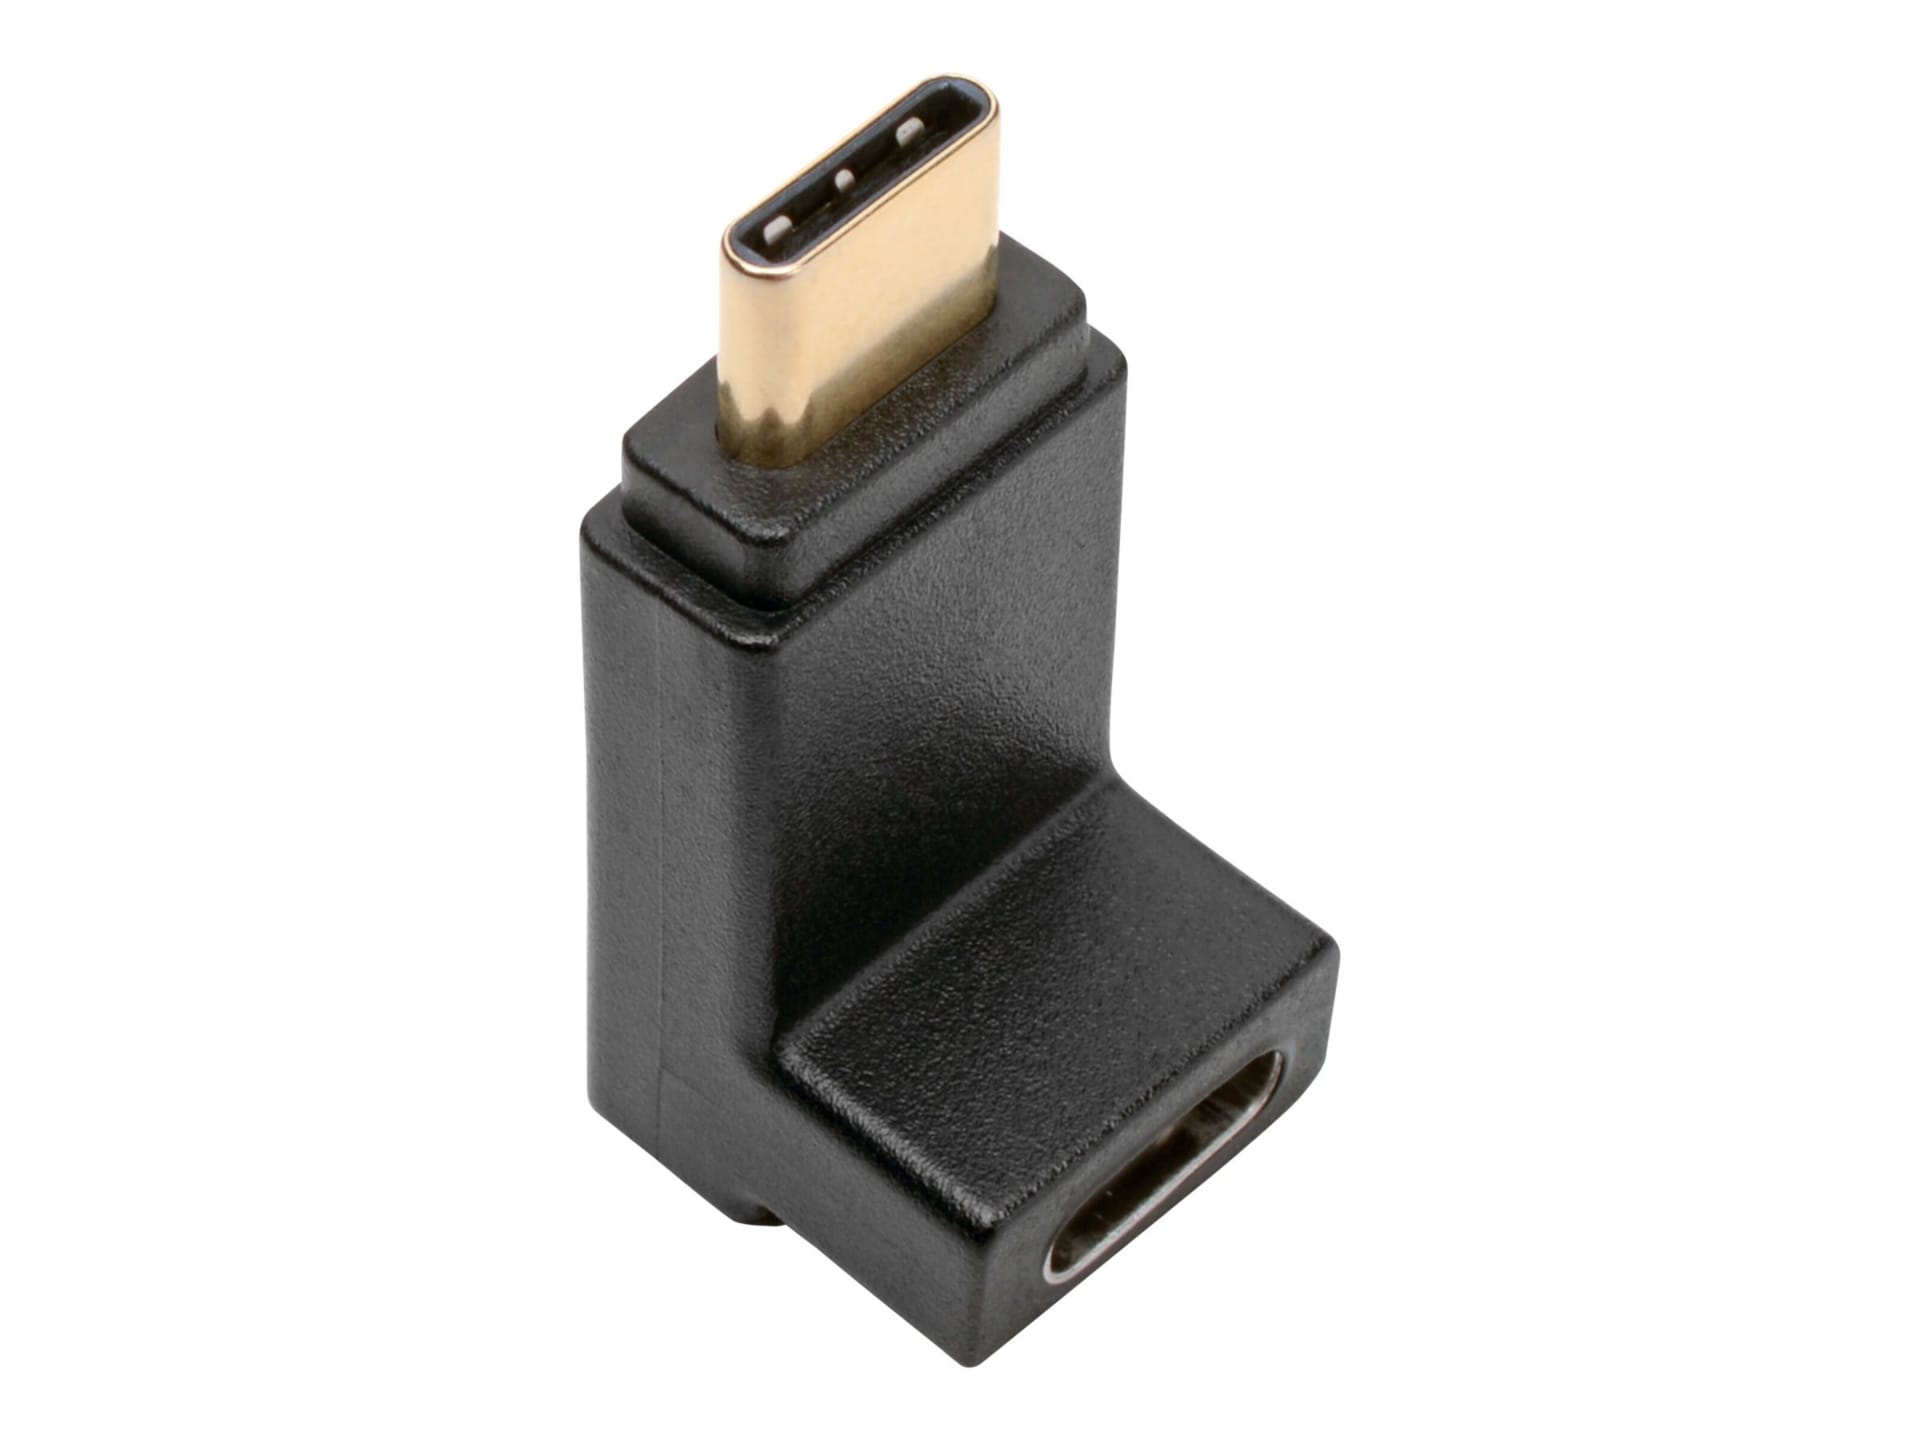 Micro USB OTG (On the Go) to USB Adapter - M/F